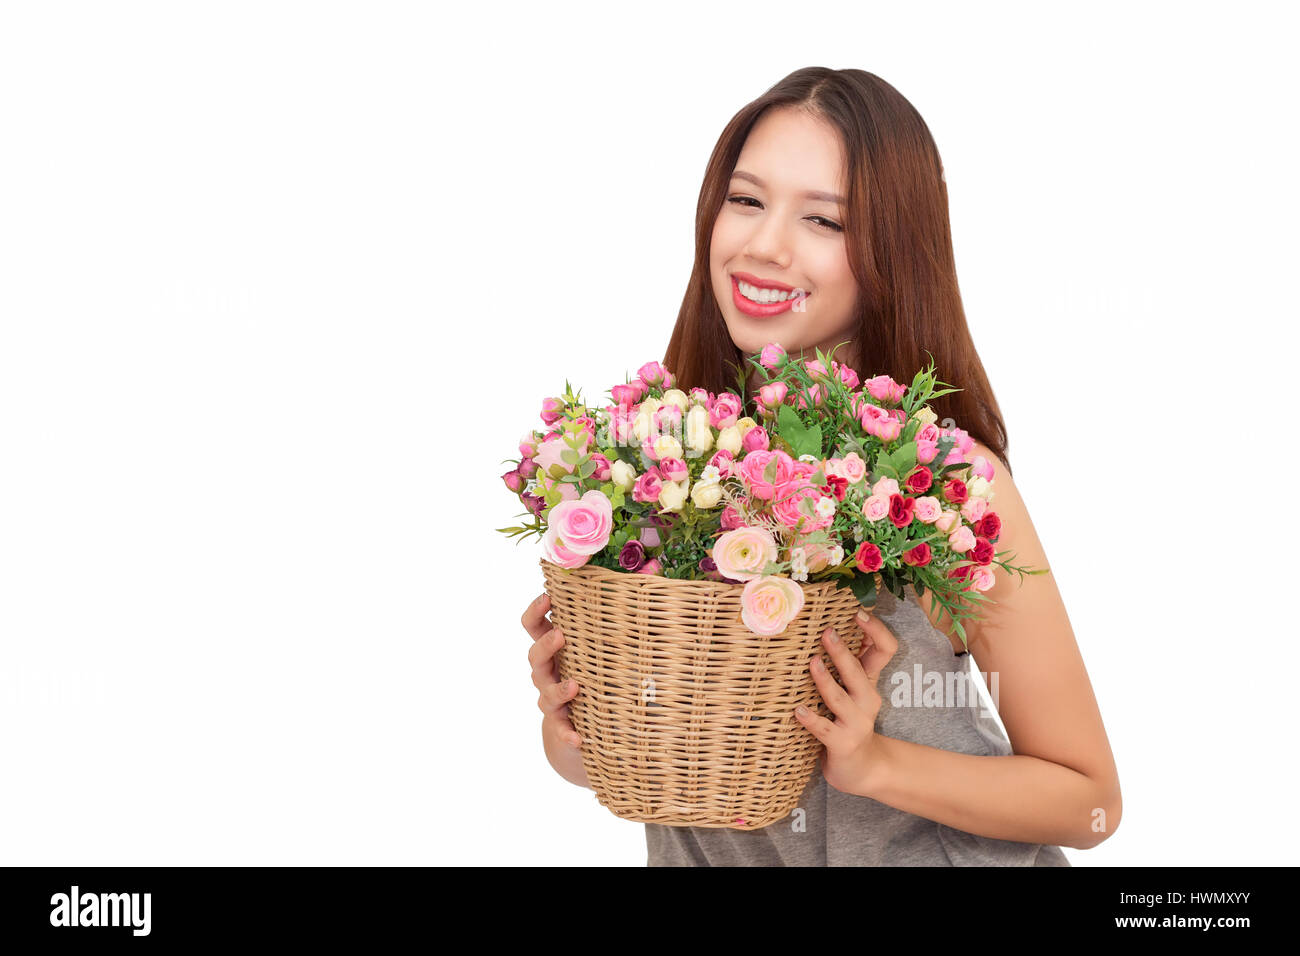 Girl holding a basket of flowers.  Isolated on white. Stock Photo